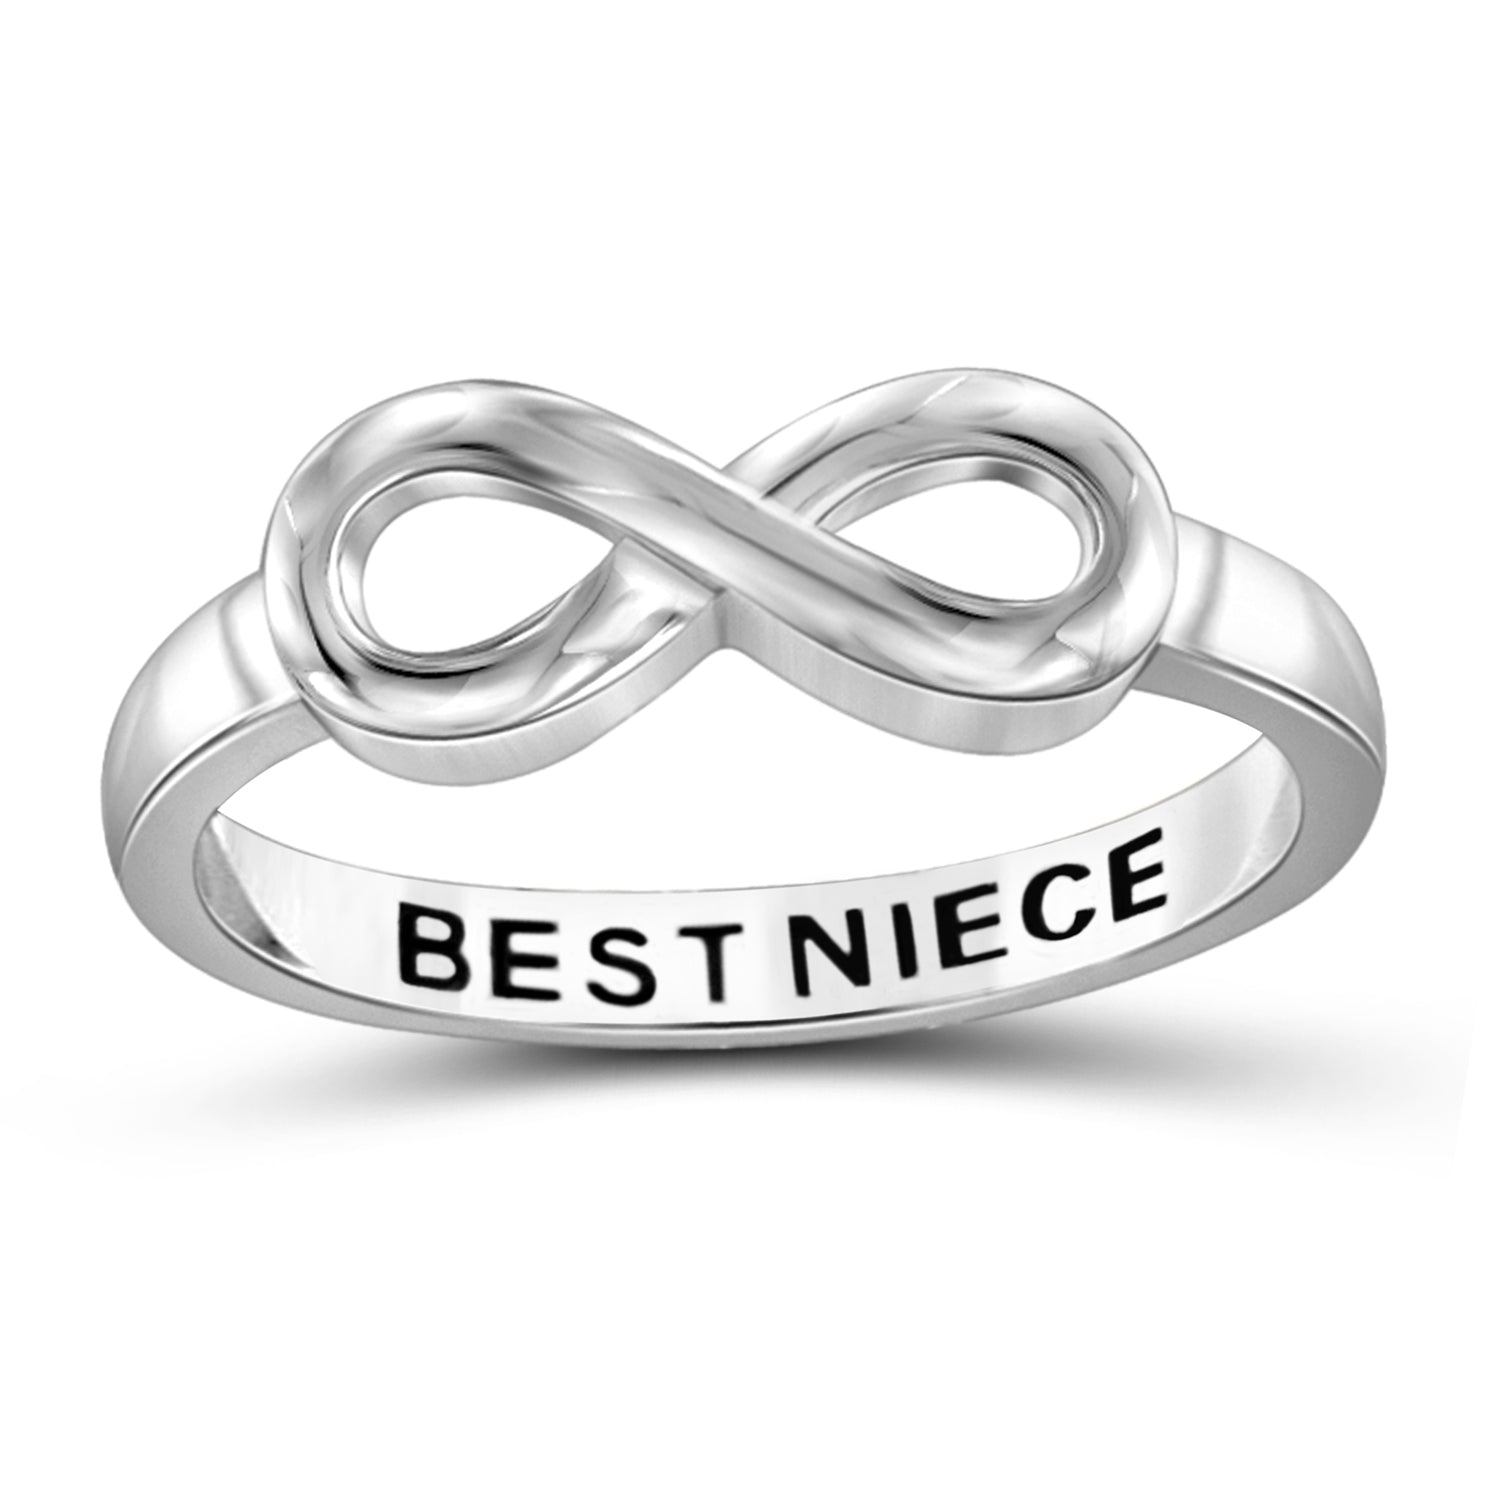 Sterling Silver Infinity Friendship Ring for Women | Personalized Best Niece, Friendship, Promise Eternity Knot Symbol Band